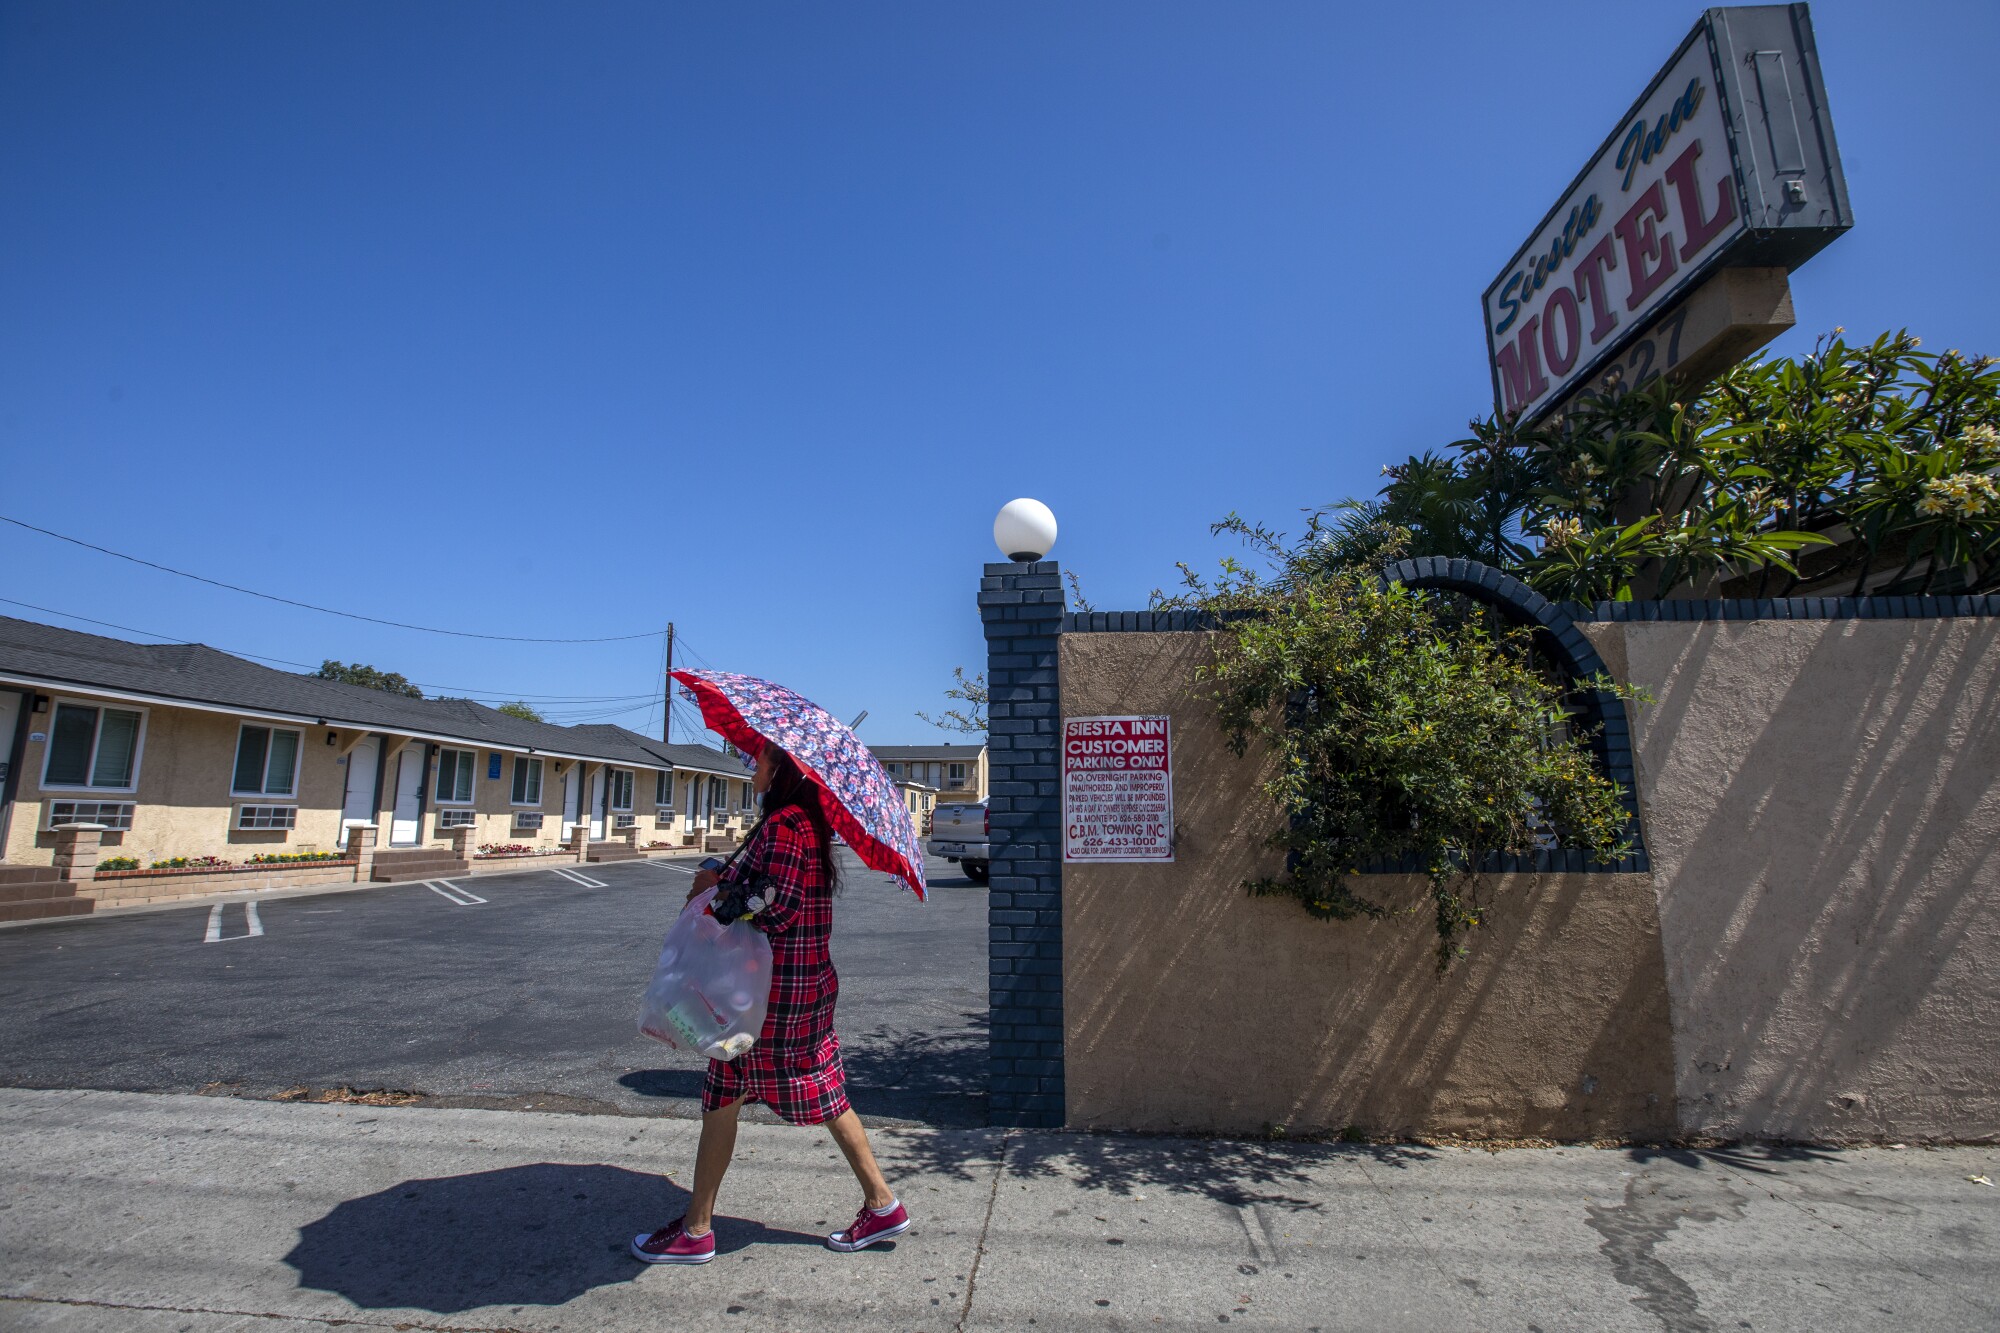 A woman walks past the Siesta Inn Motel in El Monte where two police officers